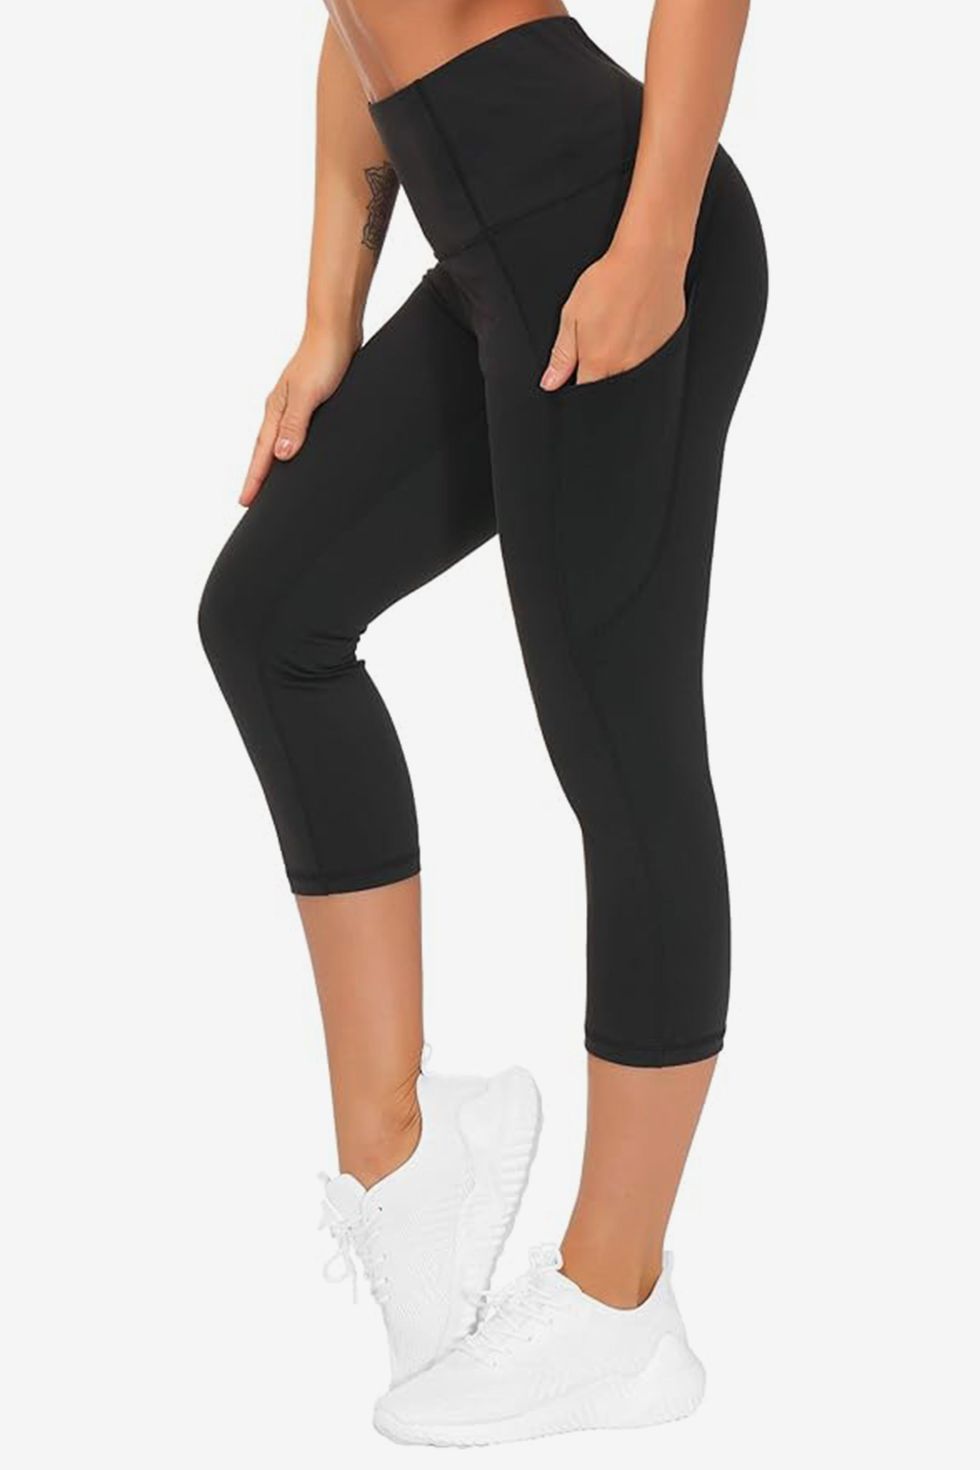  Yogipace Petite Women's 25 Yoga Workout Running Leggings with Side  Pockets Black Size XS : Clothing, Shoes & Jewelry